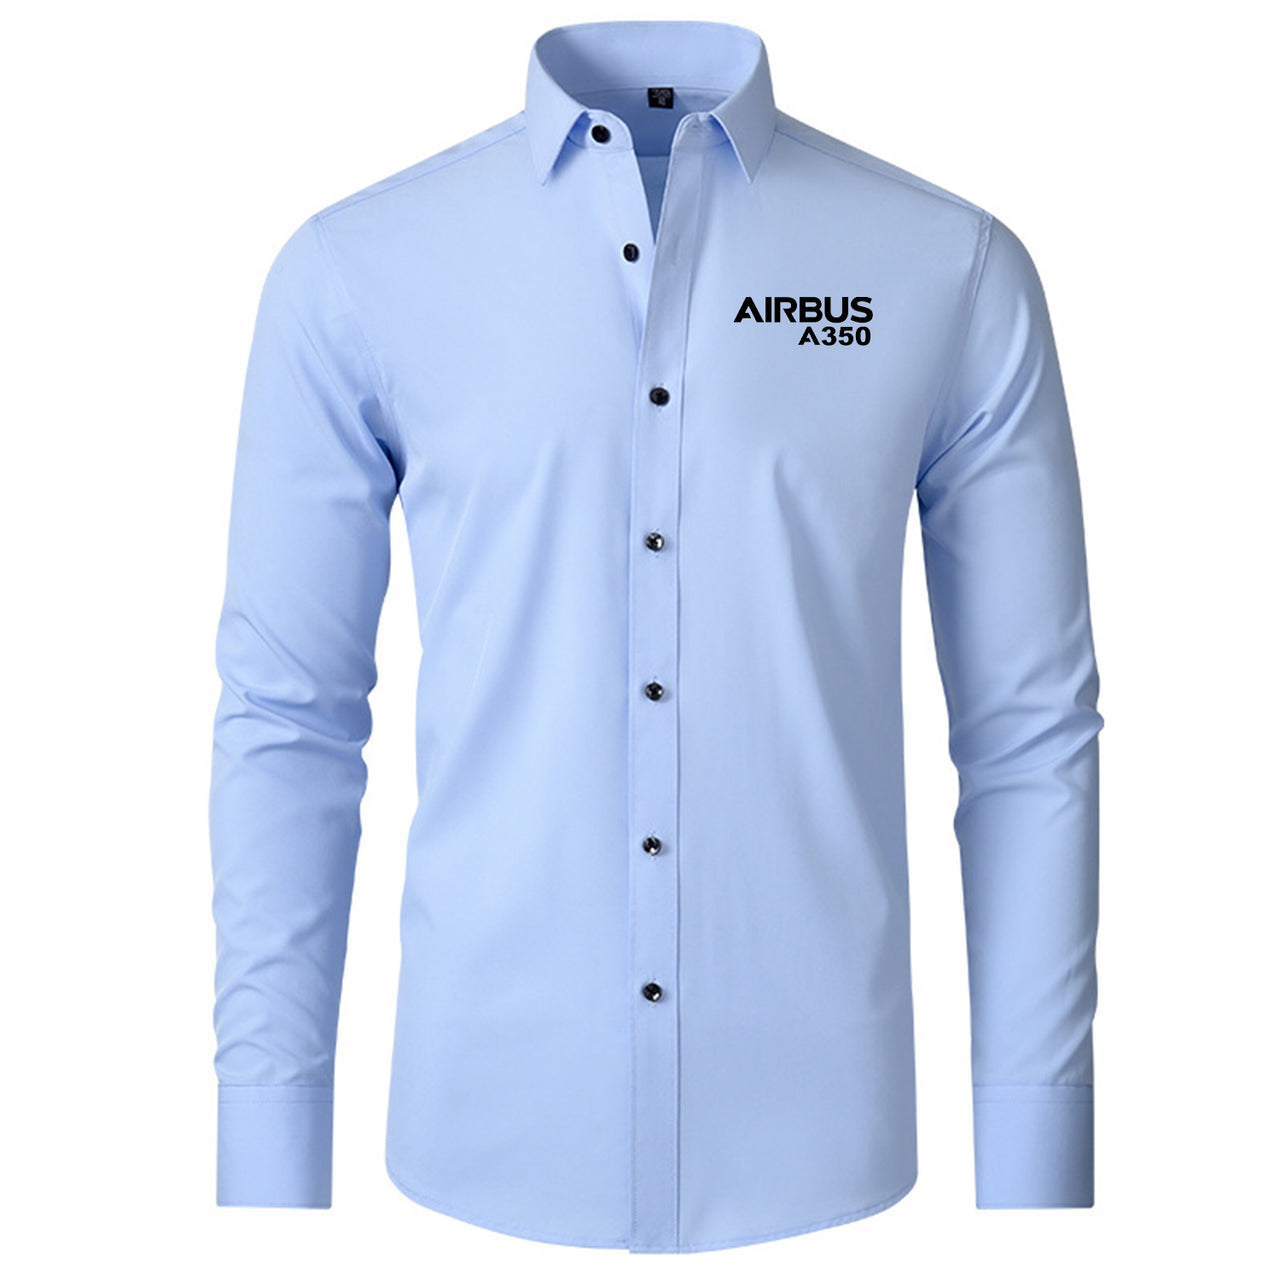 Airbus A350 & Text Designed Long Sleeve Shirts